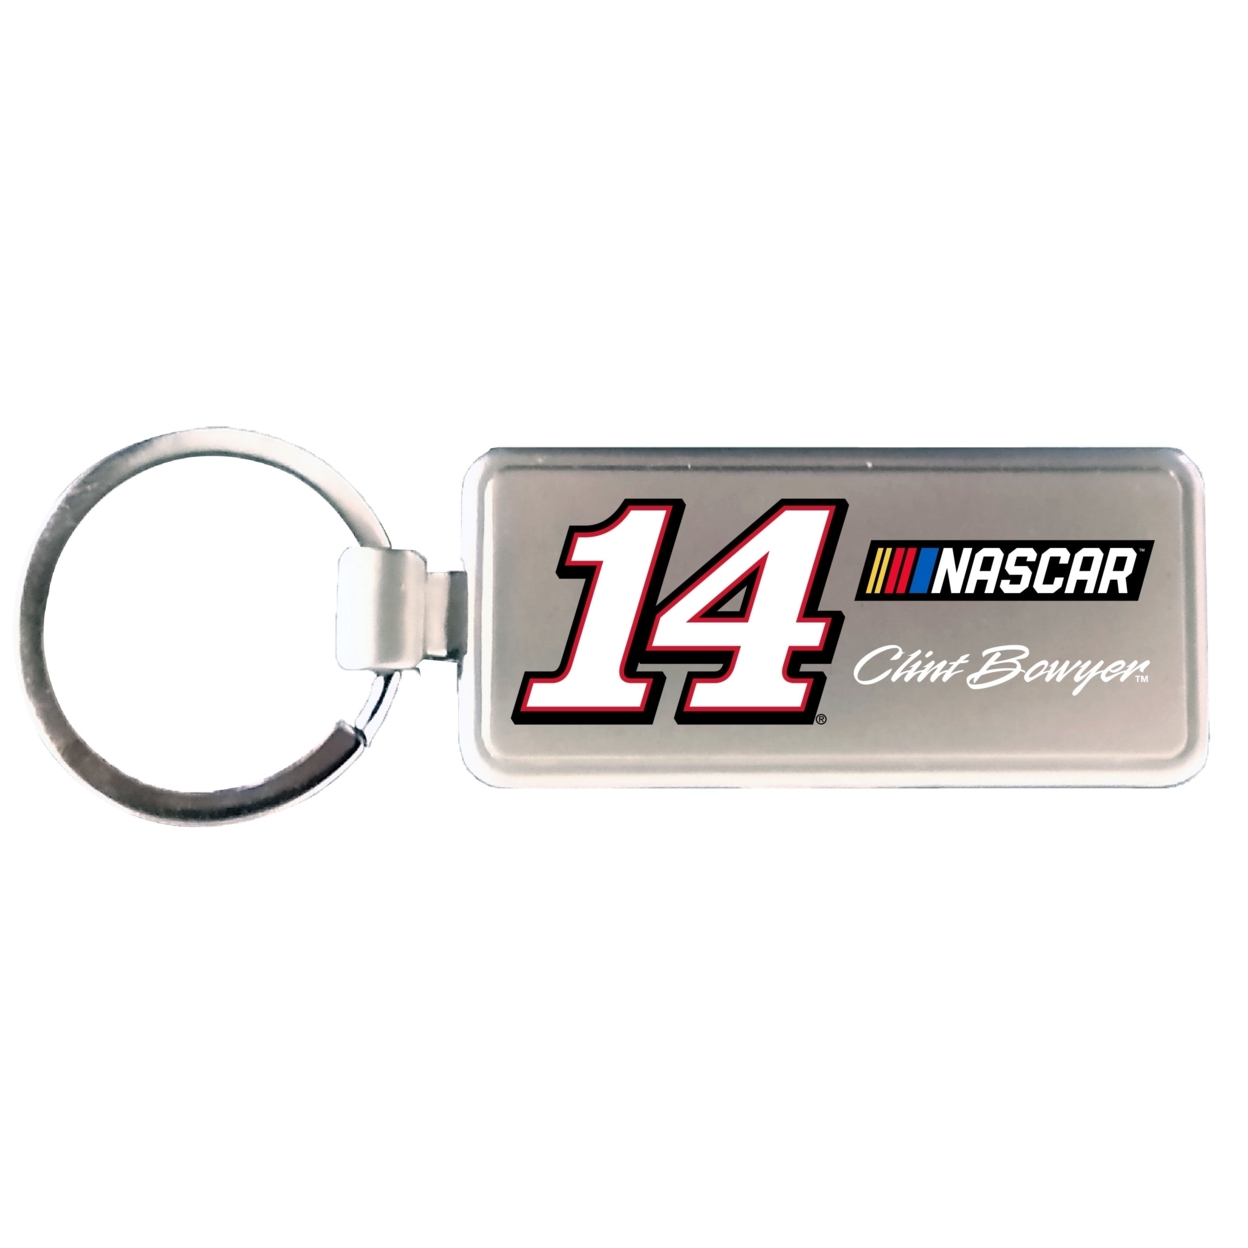 R And R Imports CB Clint Bowyer #14 NASCAR Metal Keychain